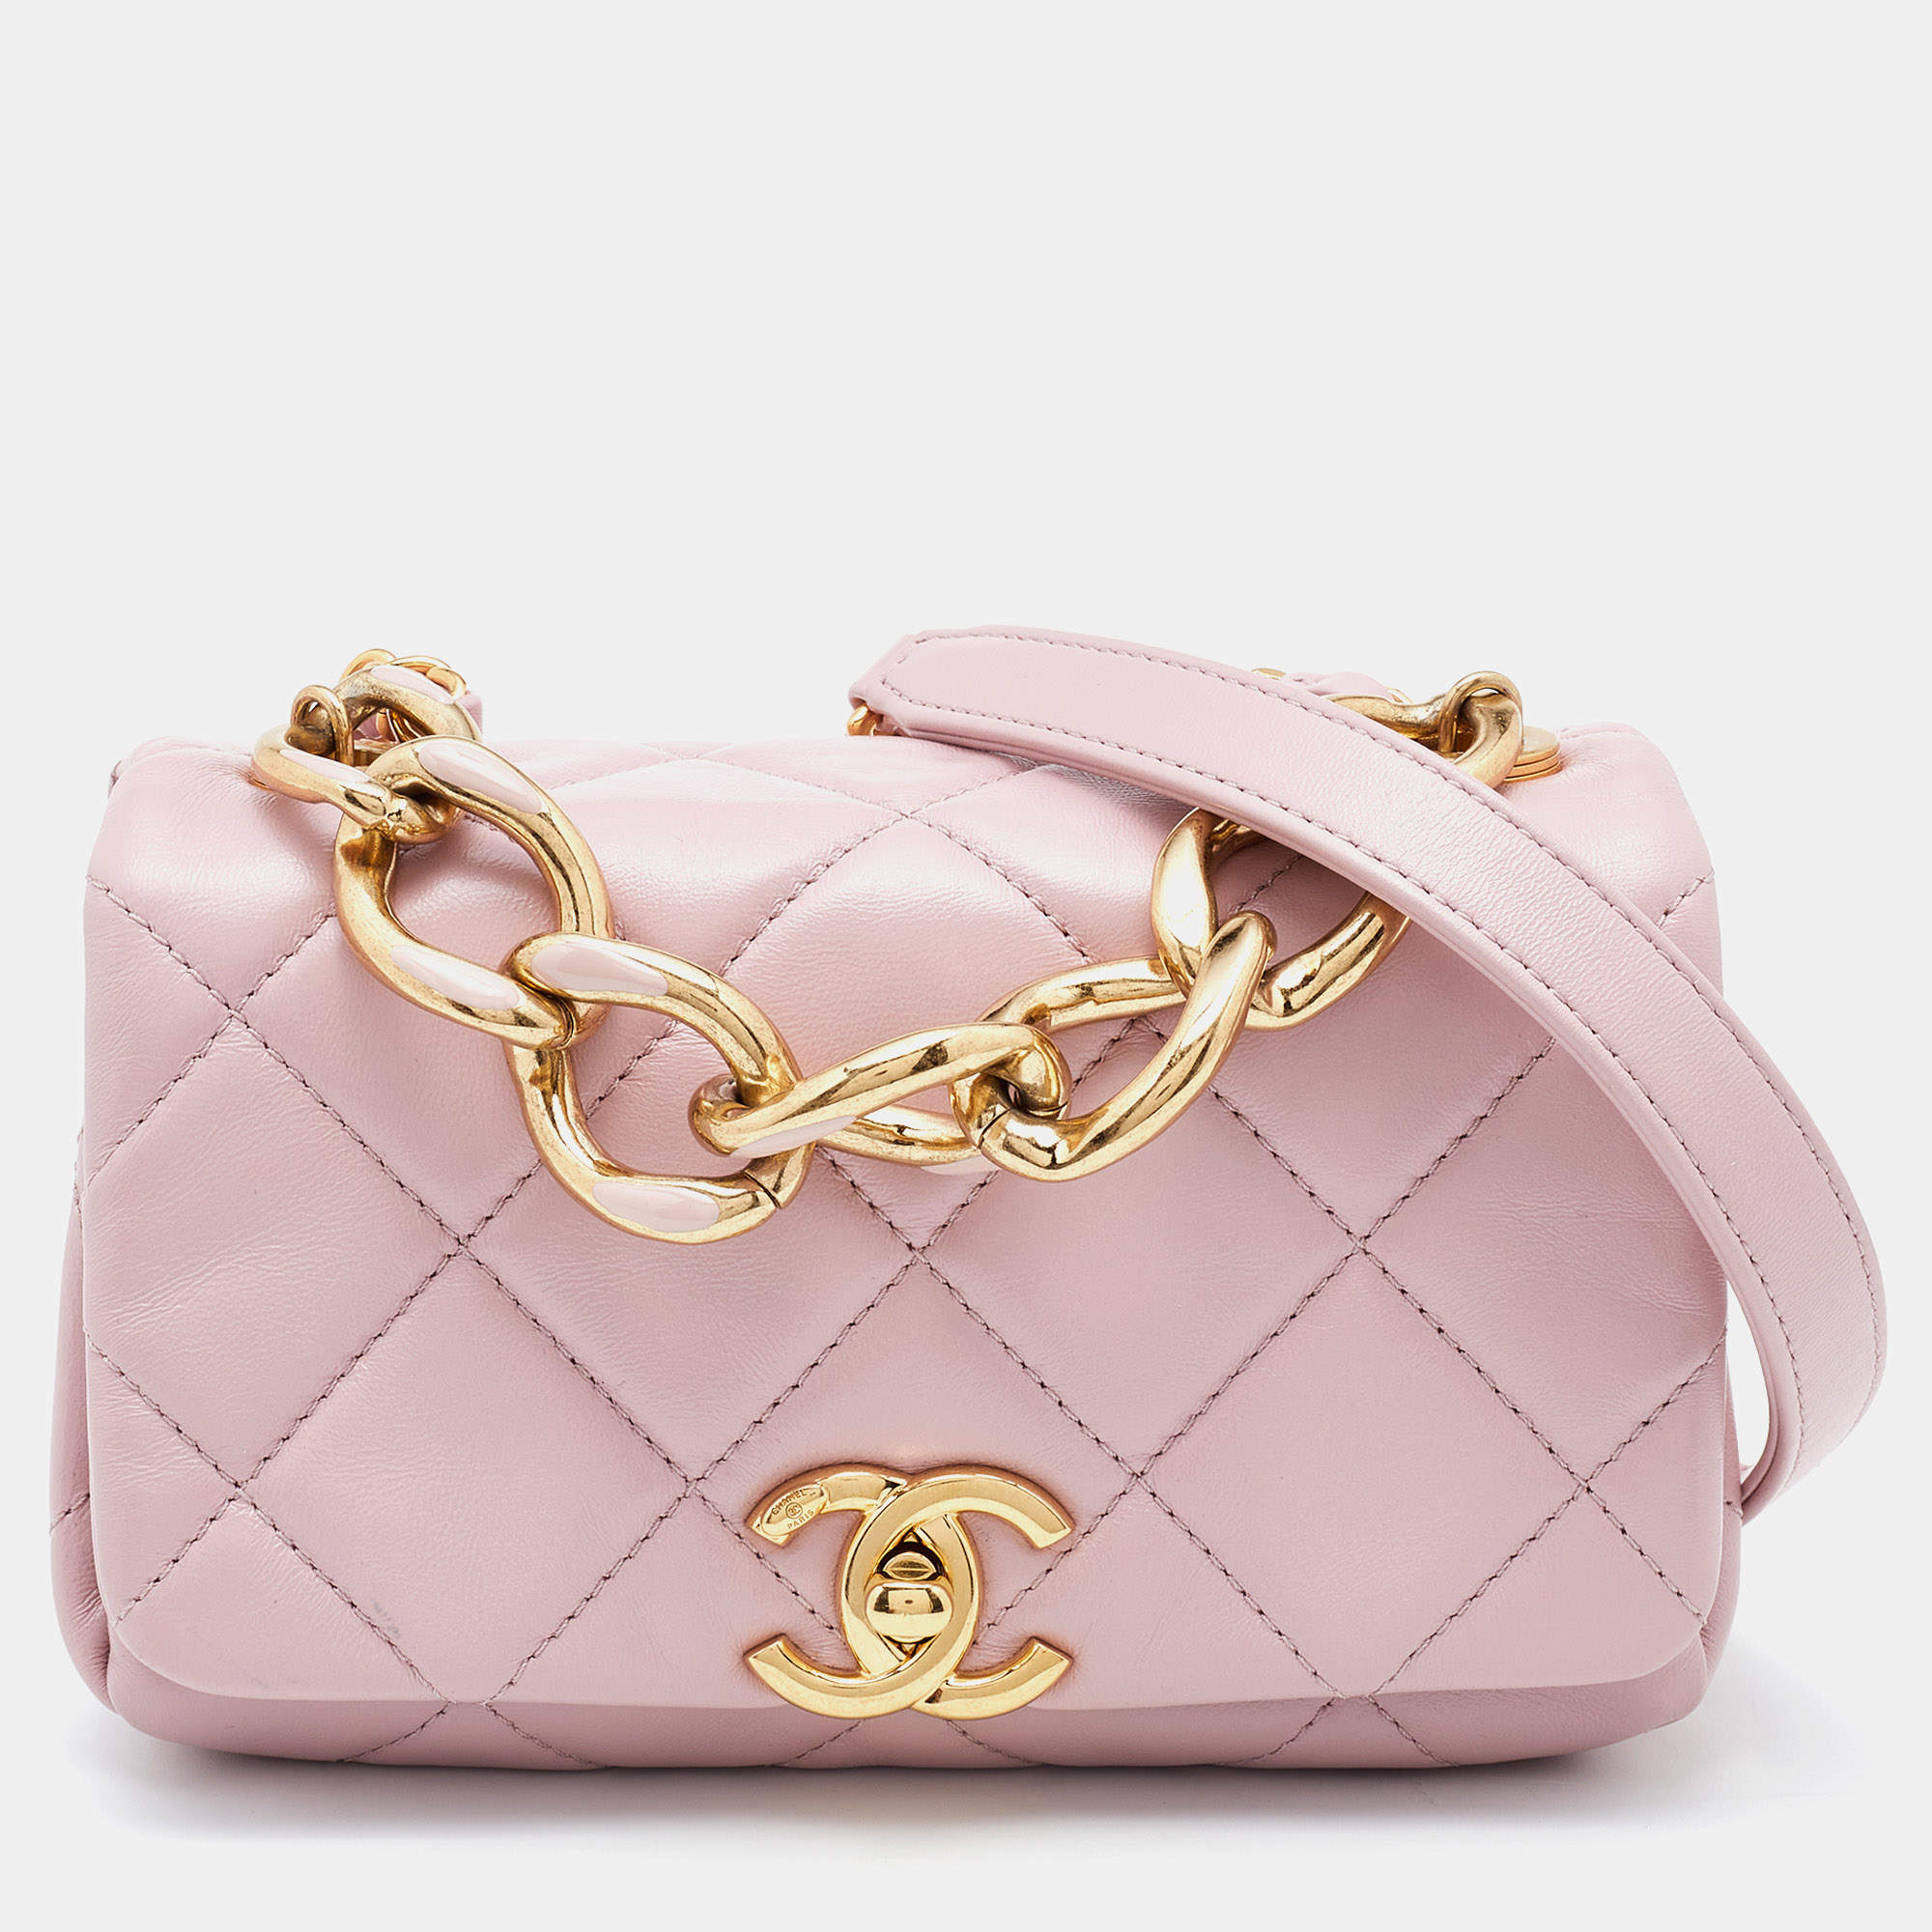 Chanel Pink Quilted Leather Mini Color Match Flap Bag Chanel | TLC